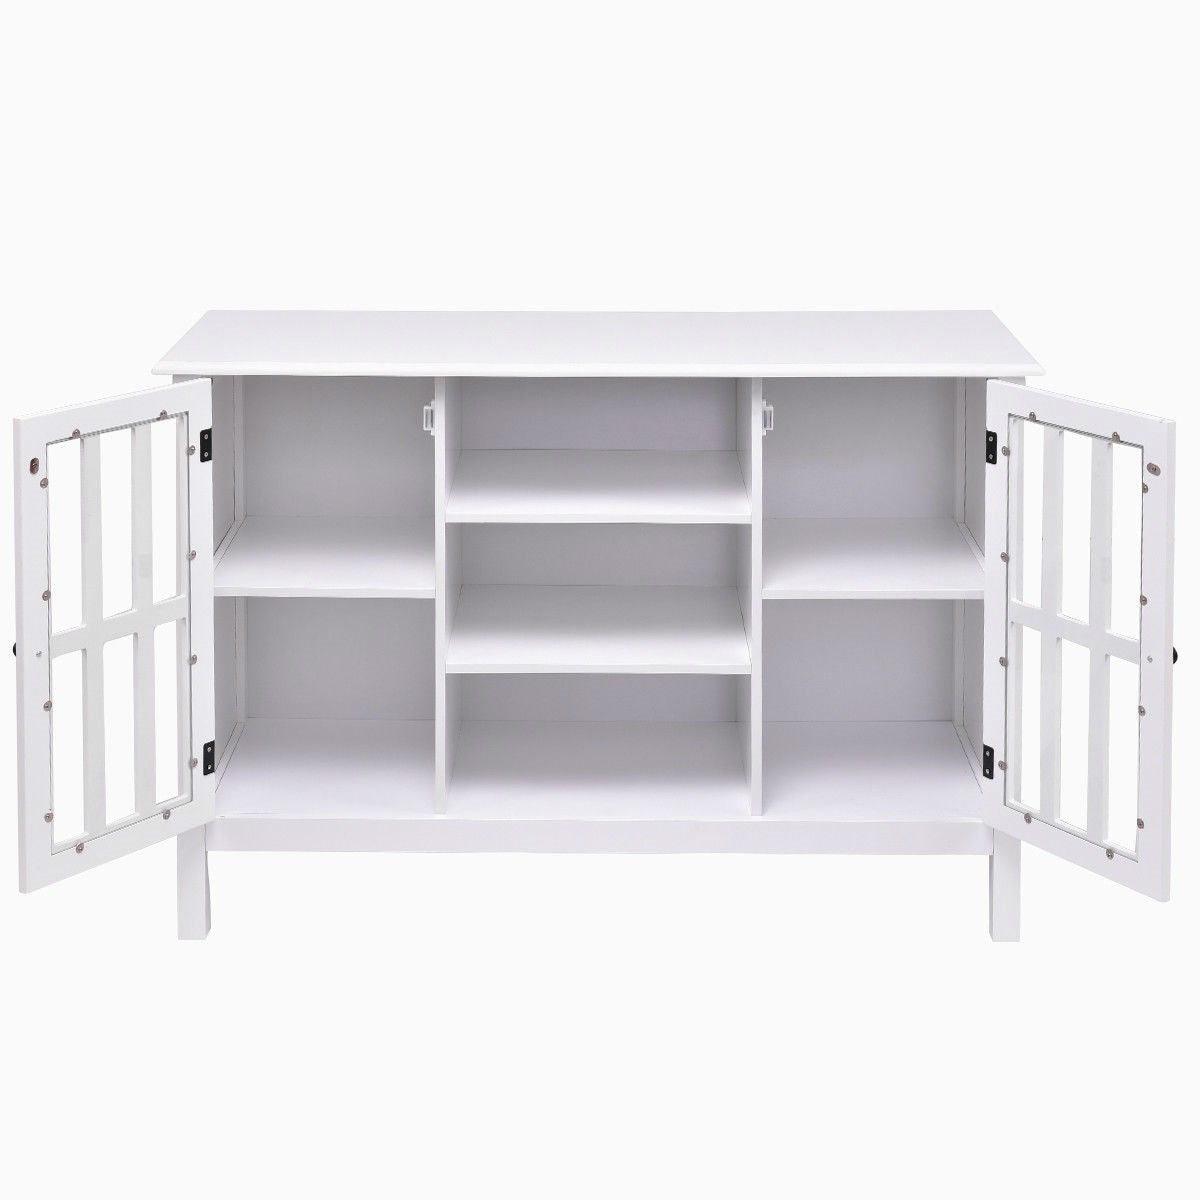 Living Room > Console & Sofa Tables - White Wood Sofa Table Console Cabinet With Tempered Glass Panel Doors